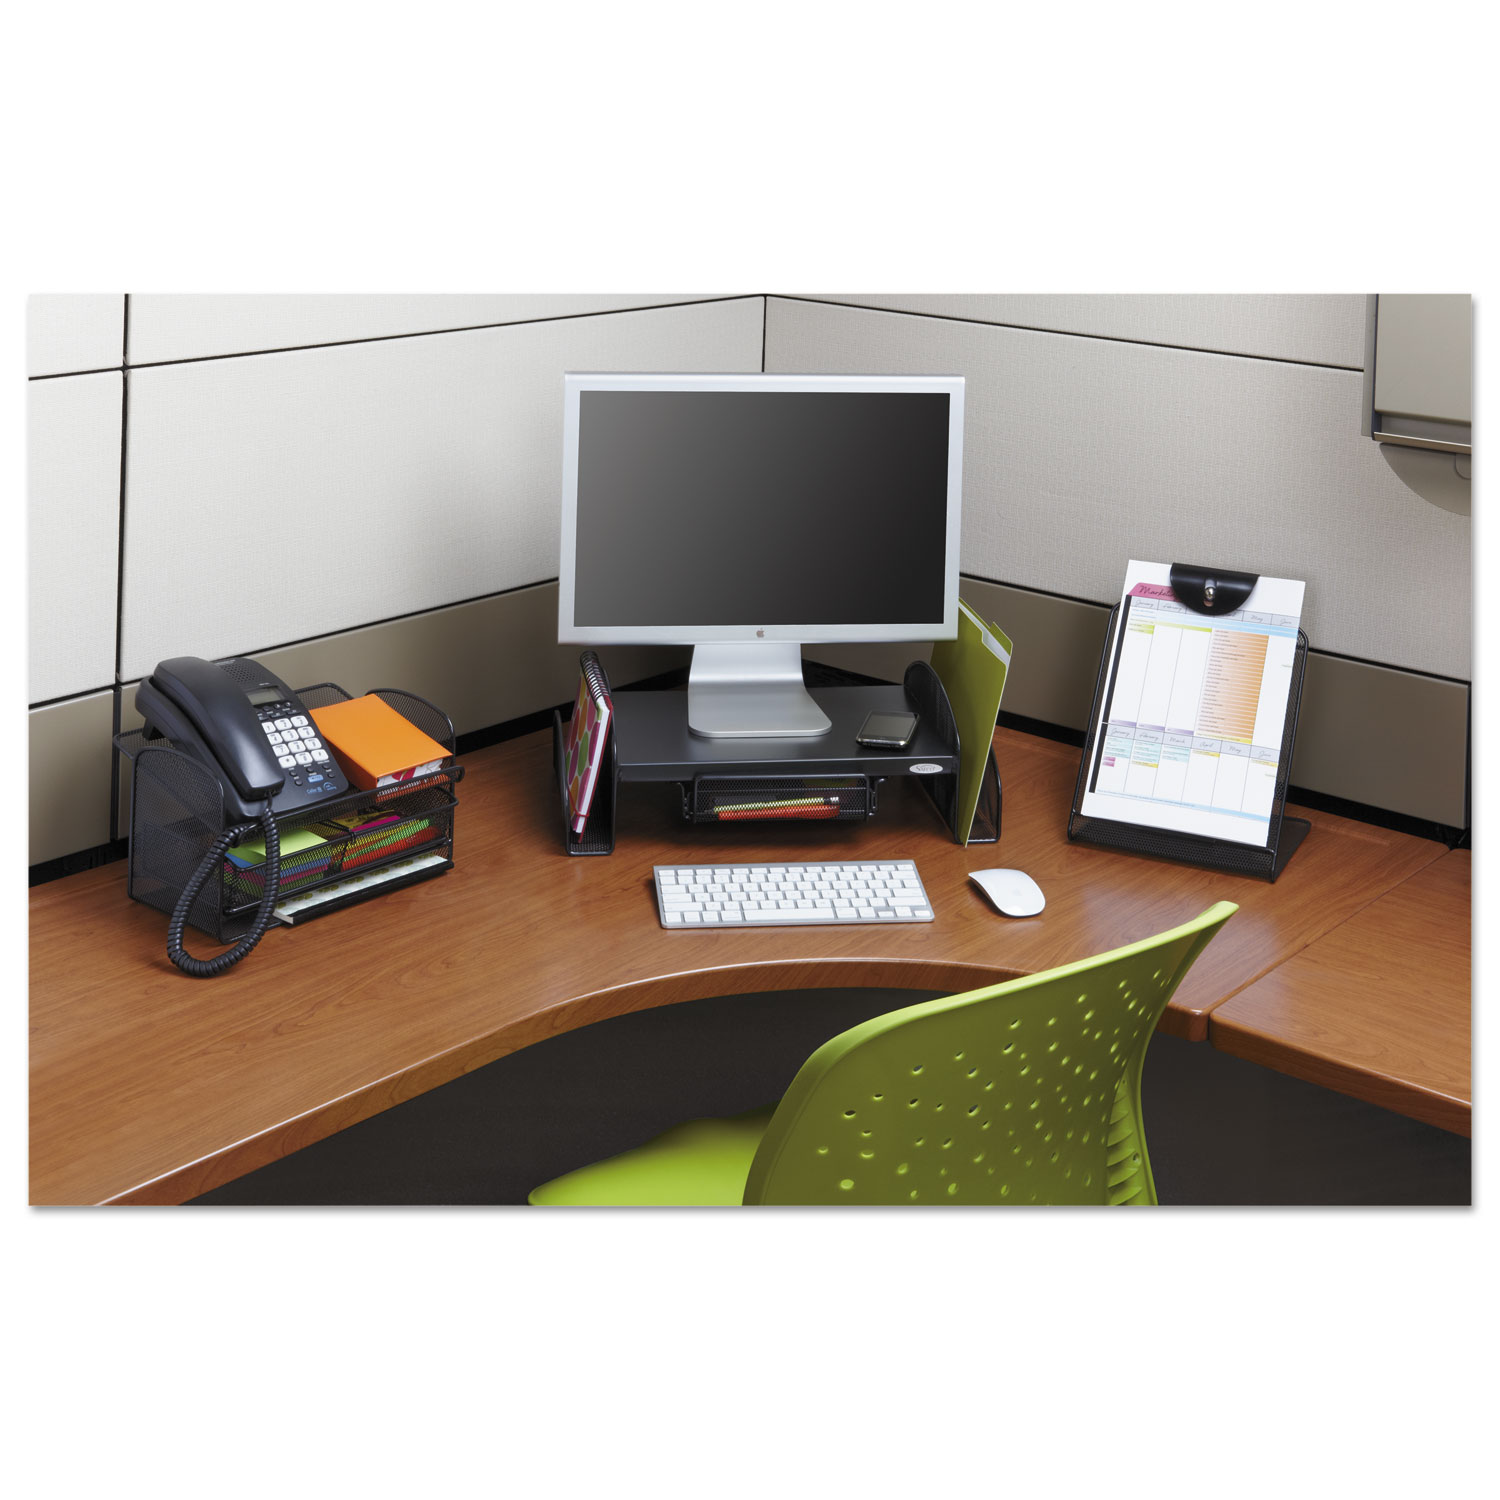 Safco Onyx Mesh Monitor Stand - image 3 of 5